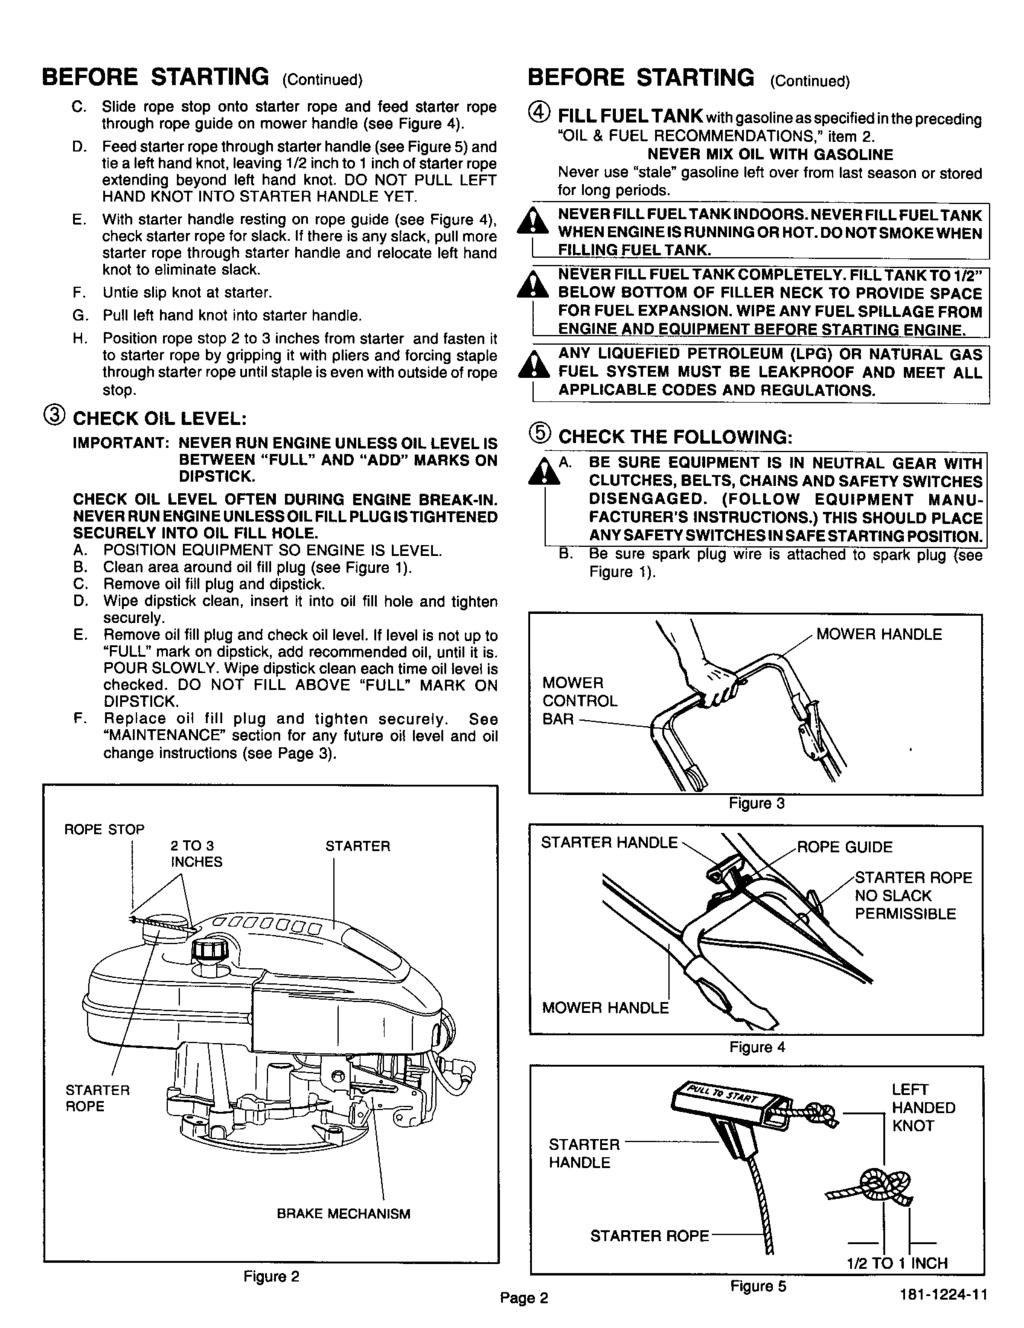 BEFORE STARTING (Continued) C. Slide rope stop onto starter rope and feed starter rope through rope guide on mower handte (see Figure 4). D.